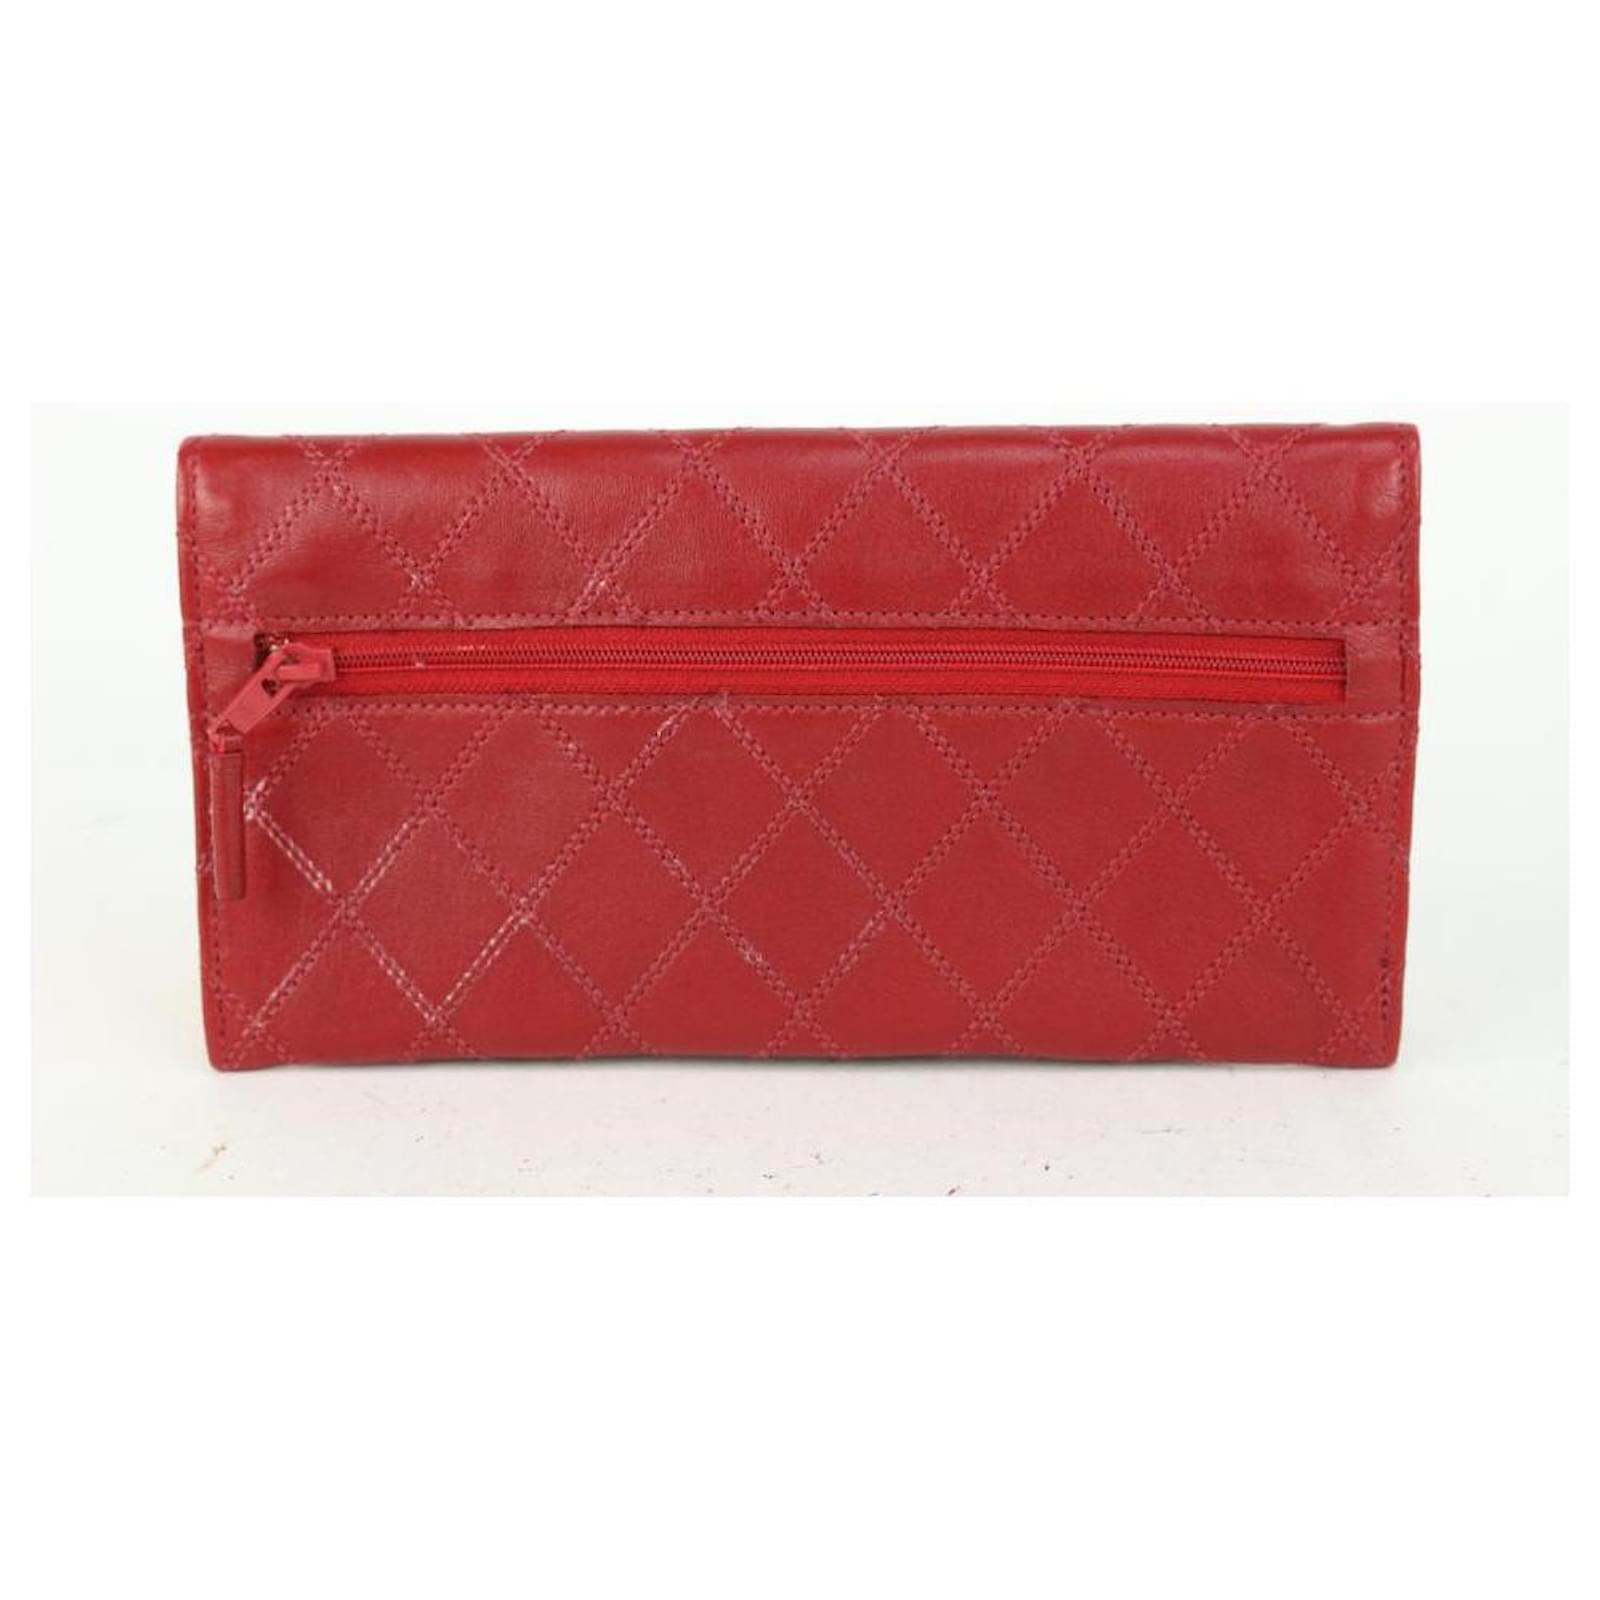 Chanel Red Quilted Lambskin Envelope Pochette Clutch Bag Leather